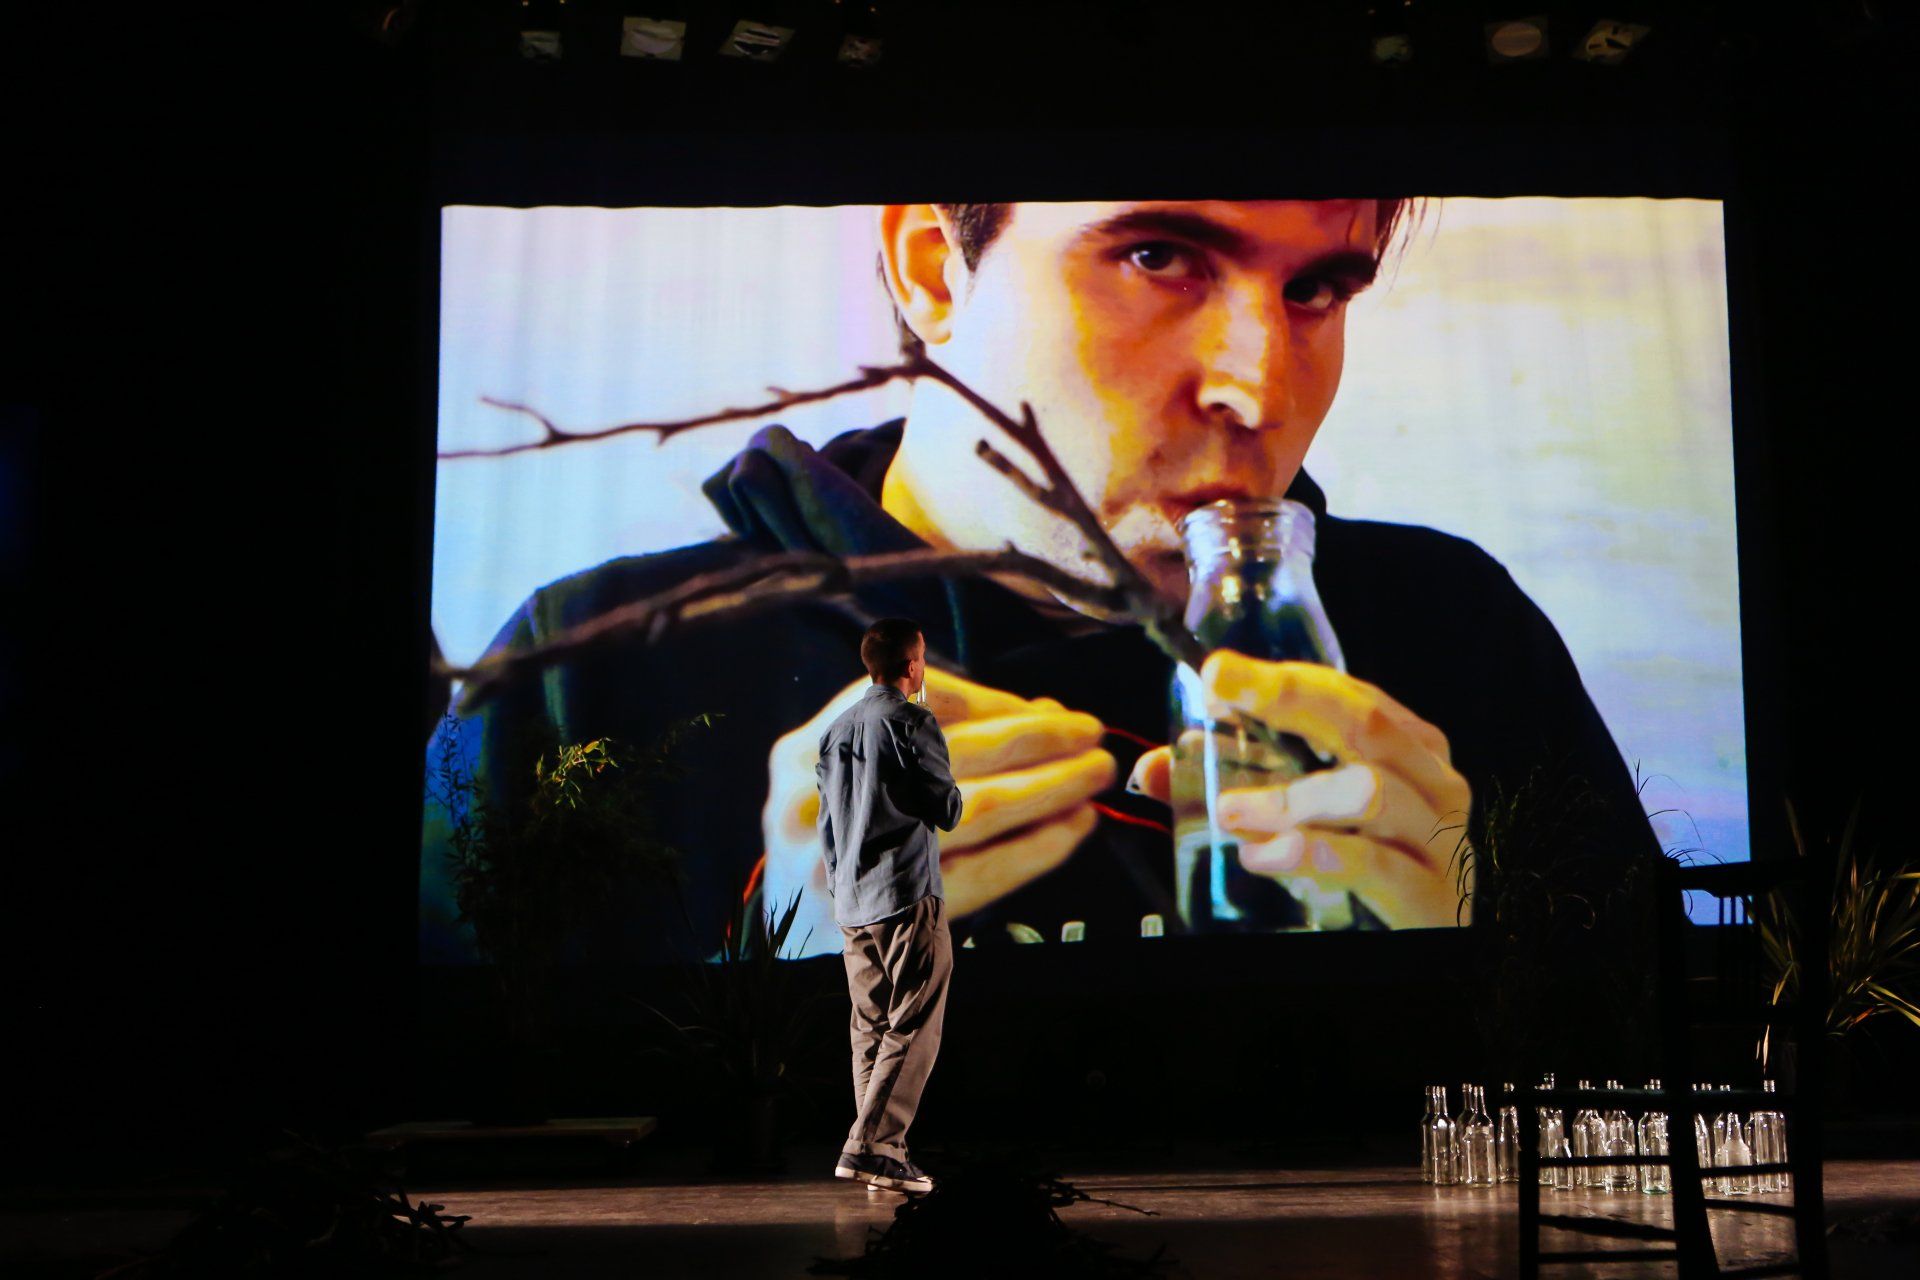 a man is standing in front of a large screen that shows a man drinking from a glass